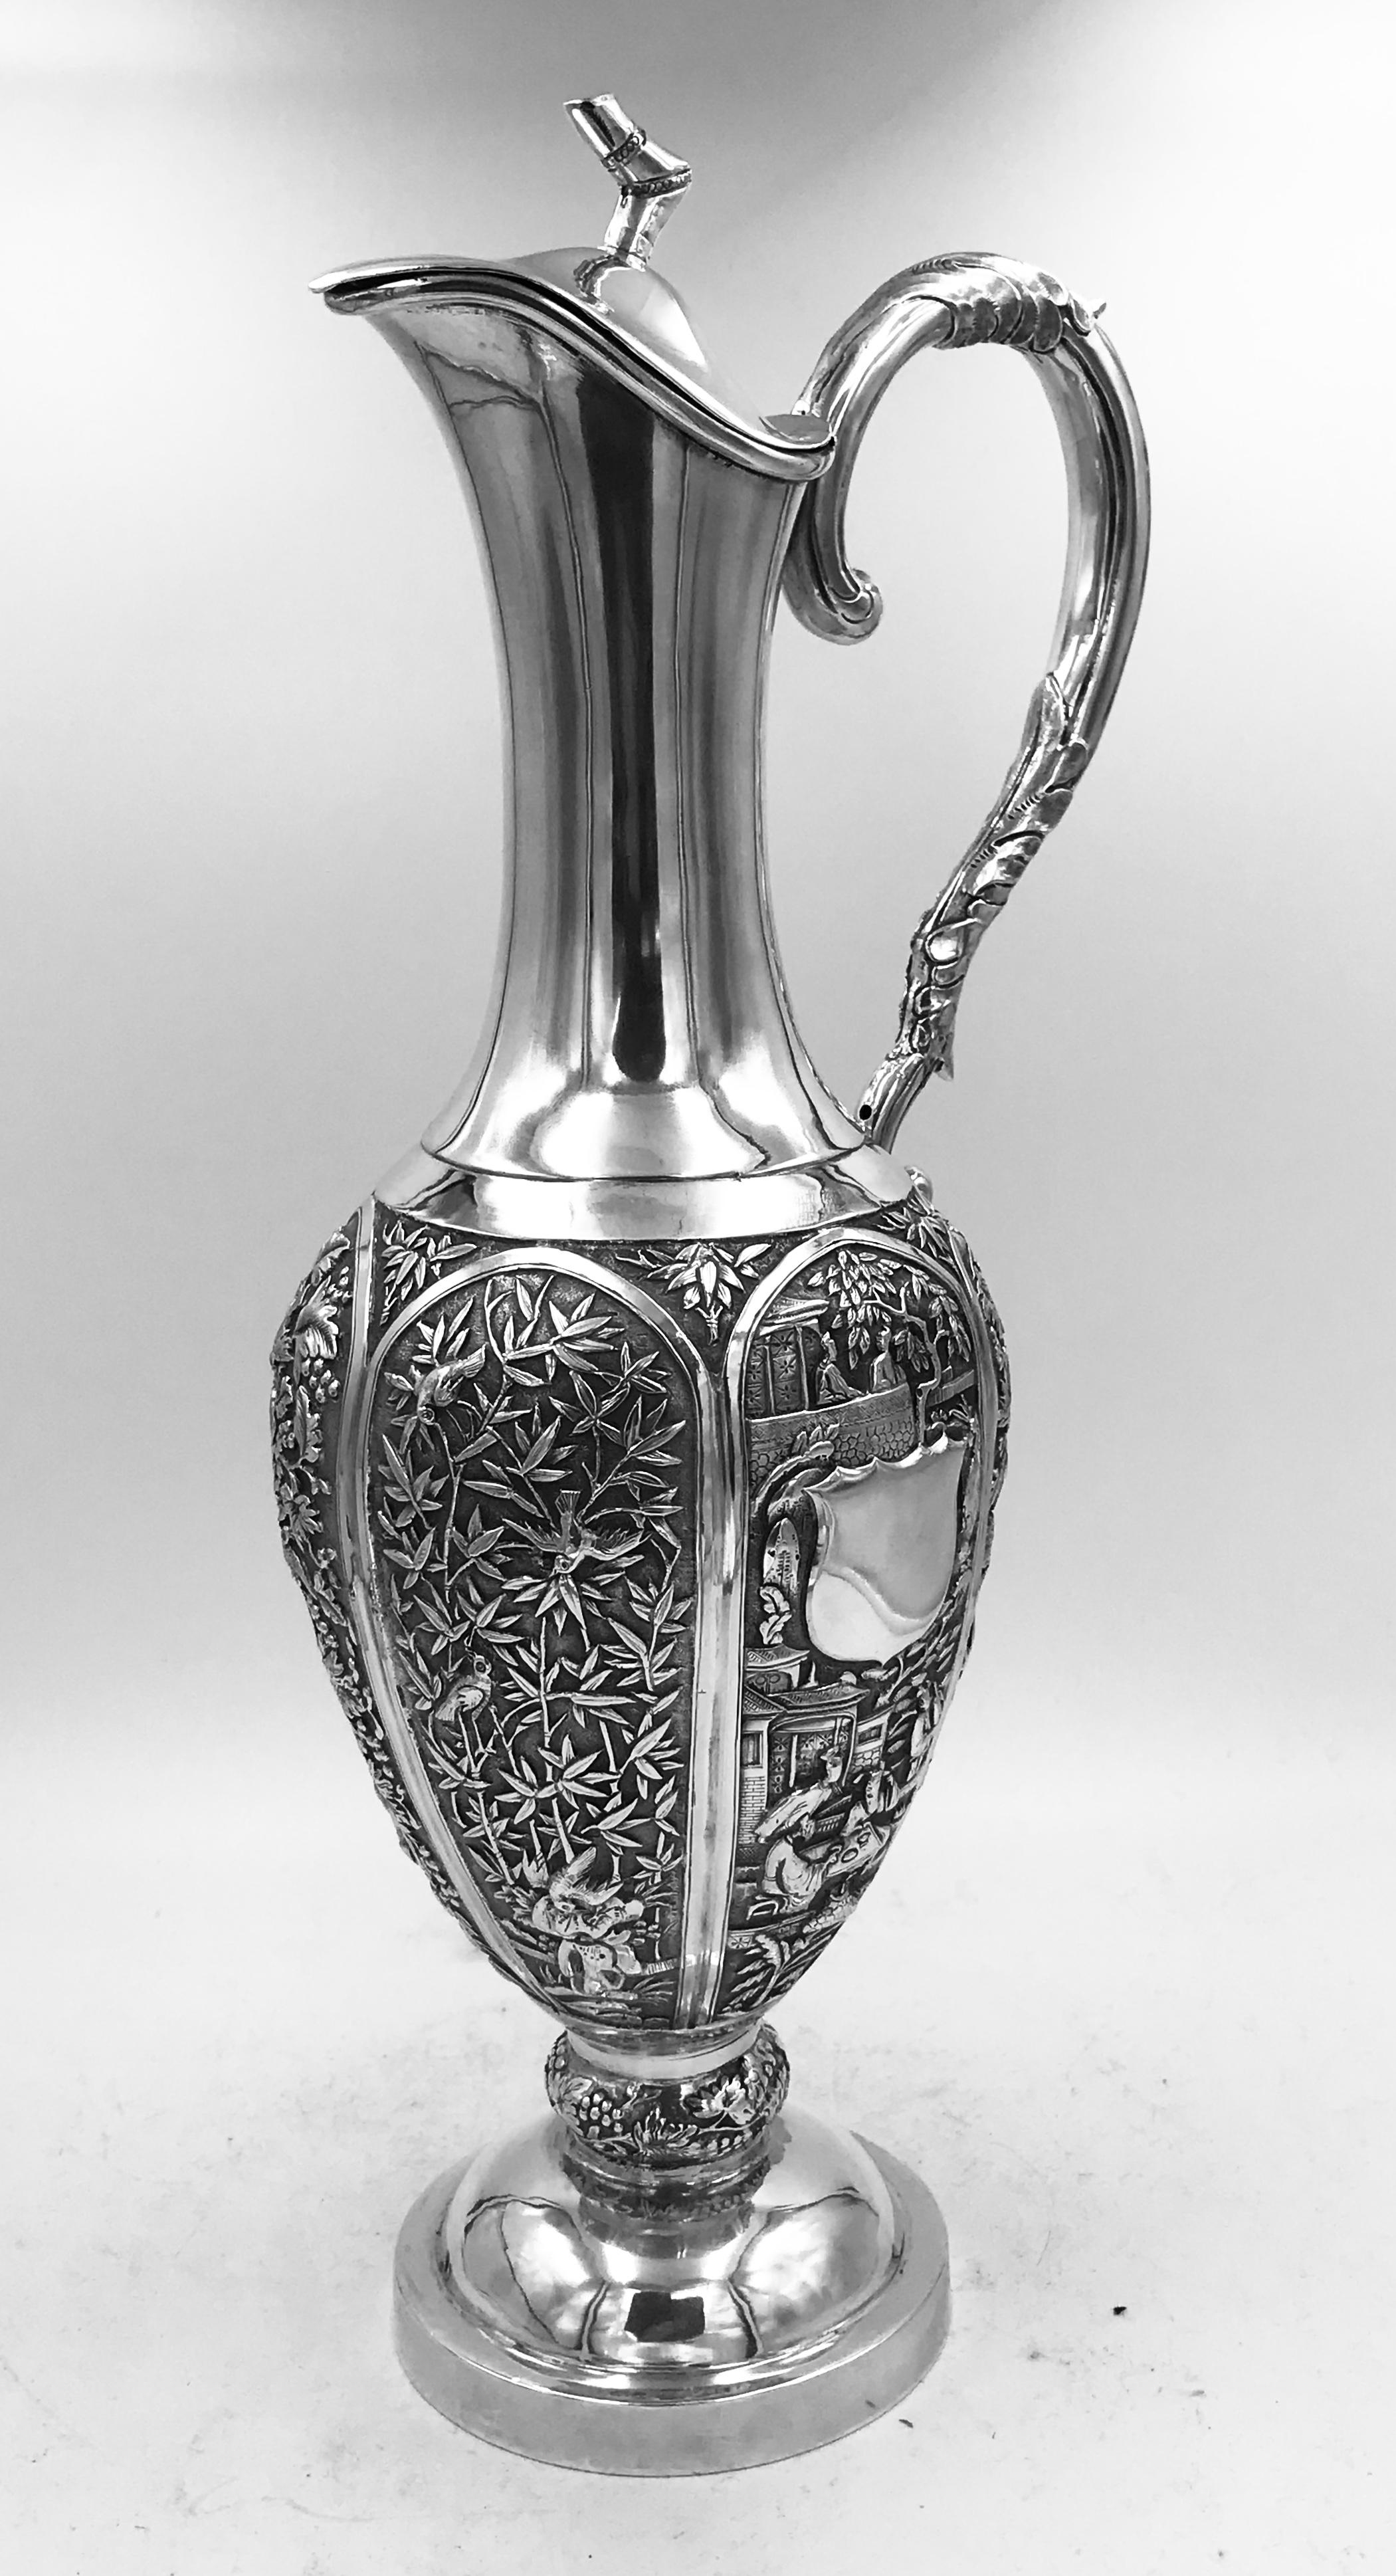 Late 19th Century Chinese Export Silver Jug